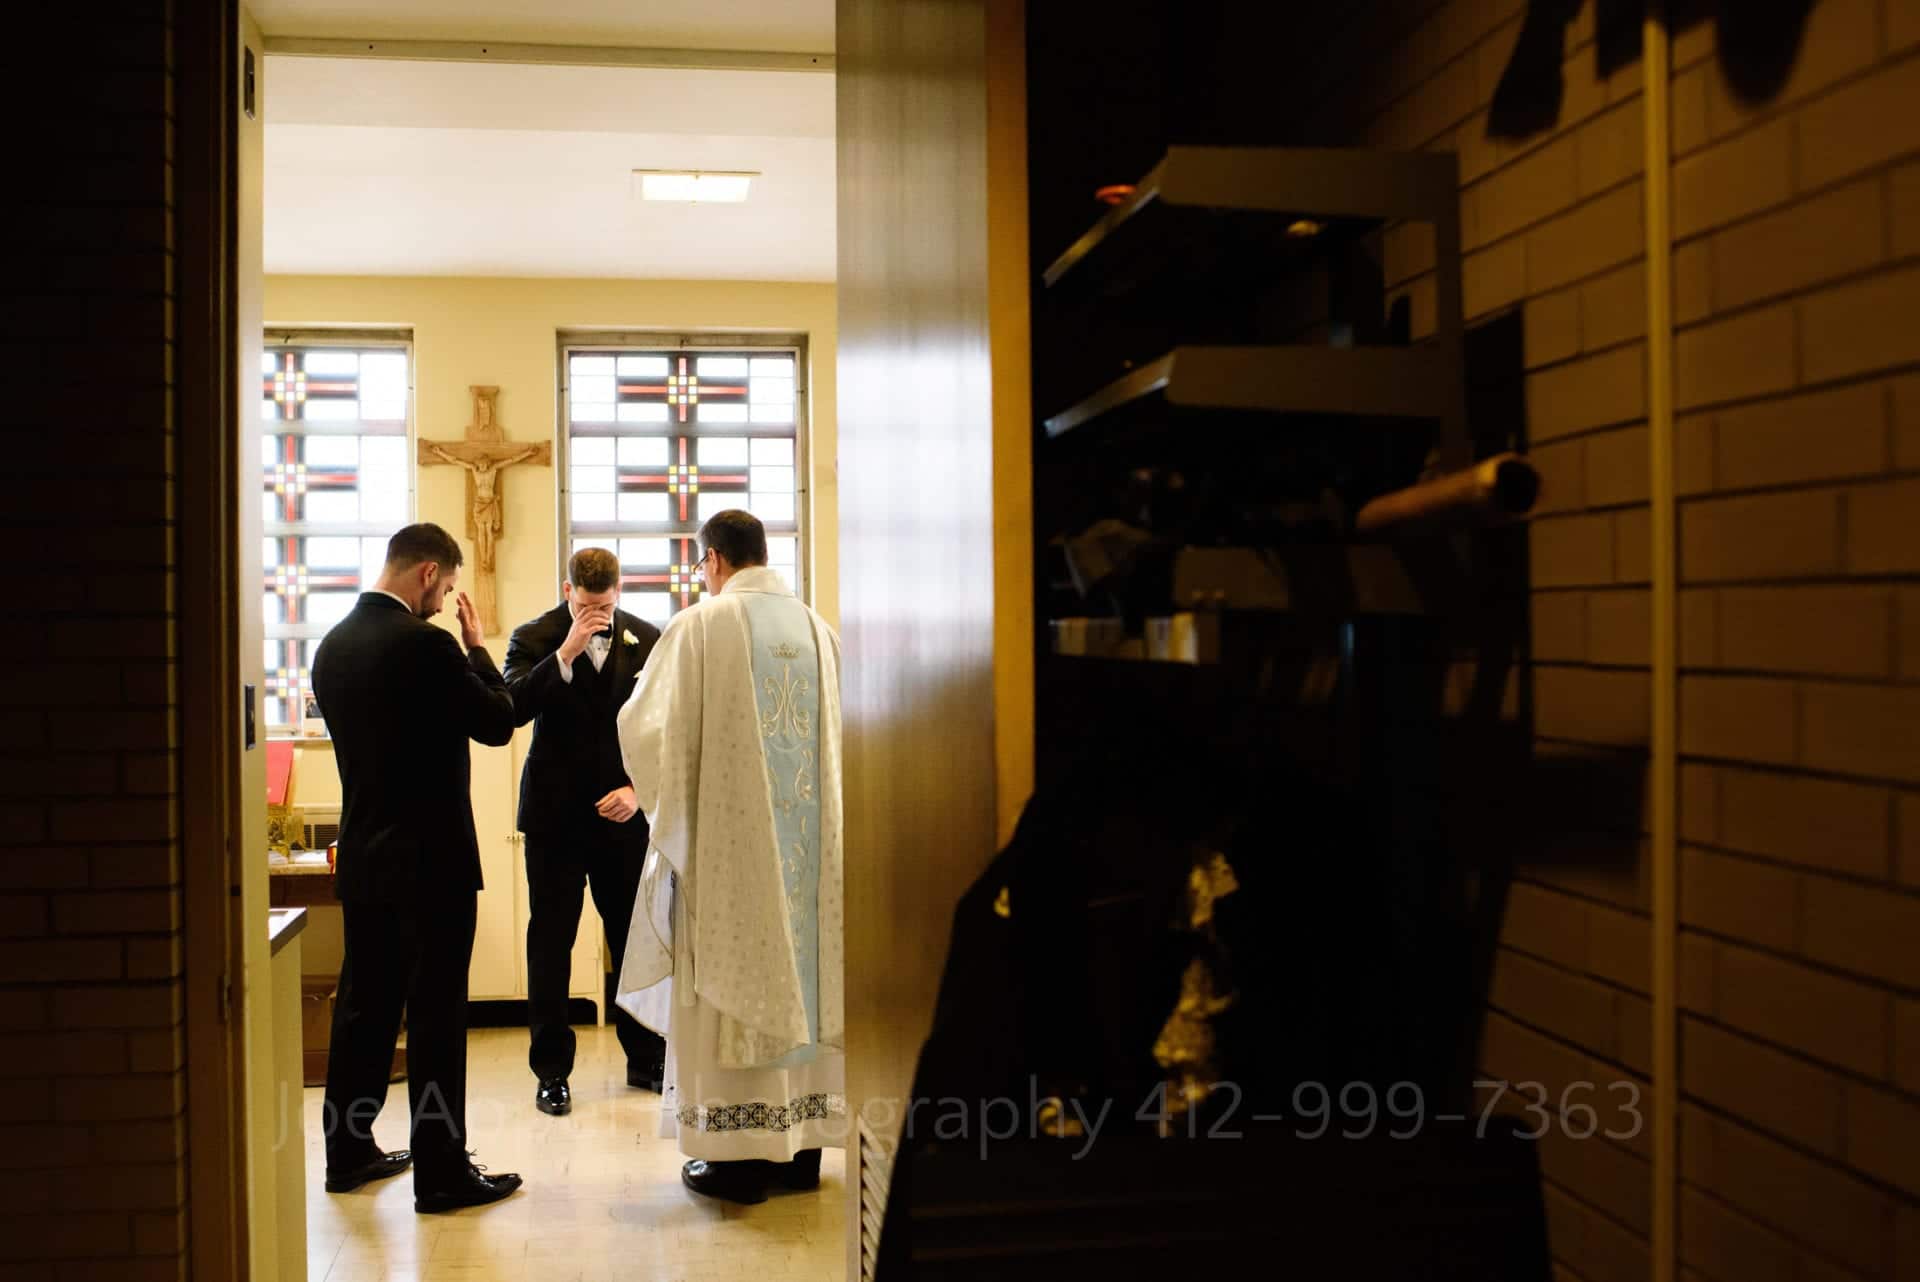 Seen through a doorway, a groom and his twin brother cross themselves while saying a prayer with a priest in white and light blue vestments prior to the groom's wedding ceremony.